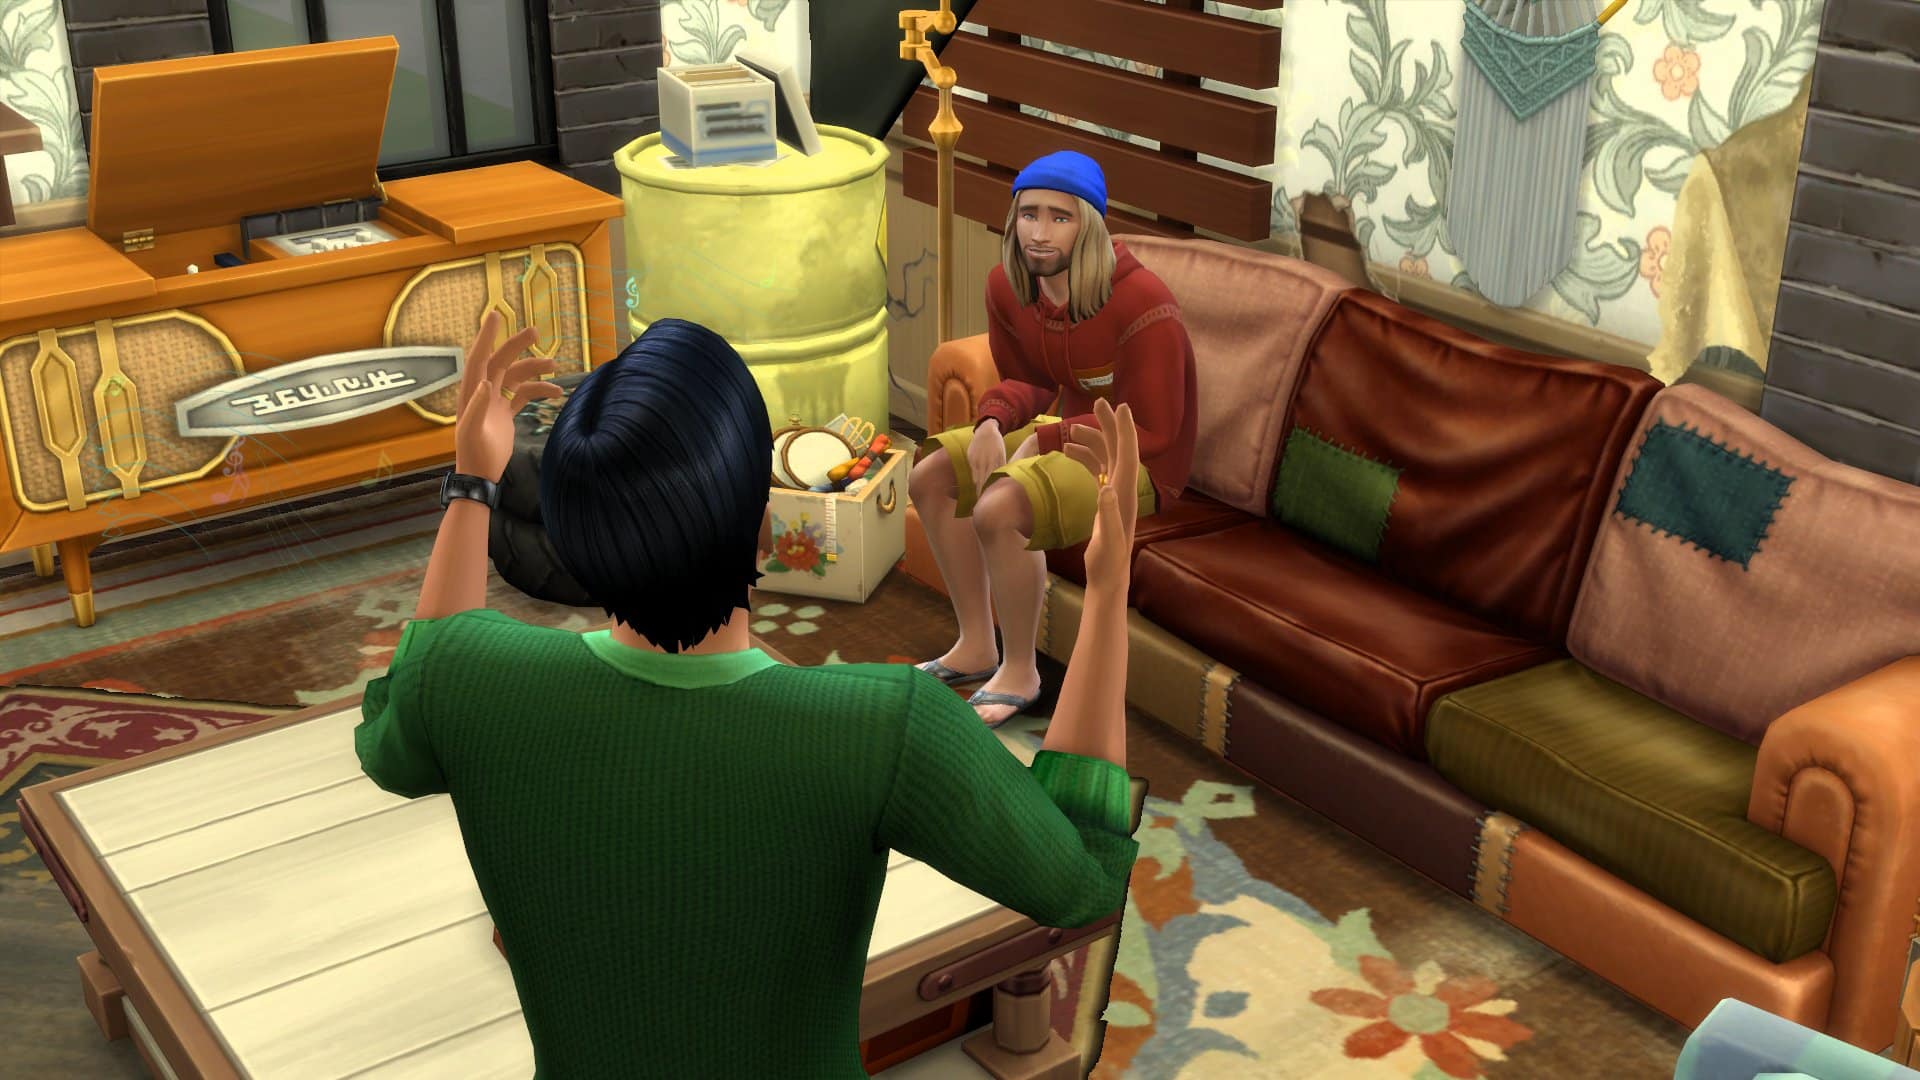 The Sims 4 Eco-Living Stuff: First Look at CAS